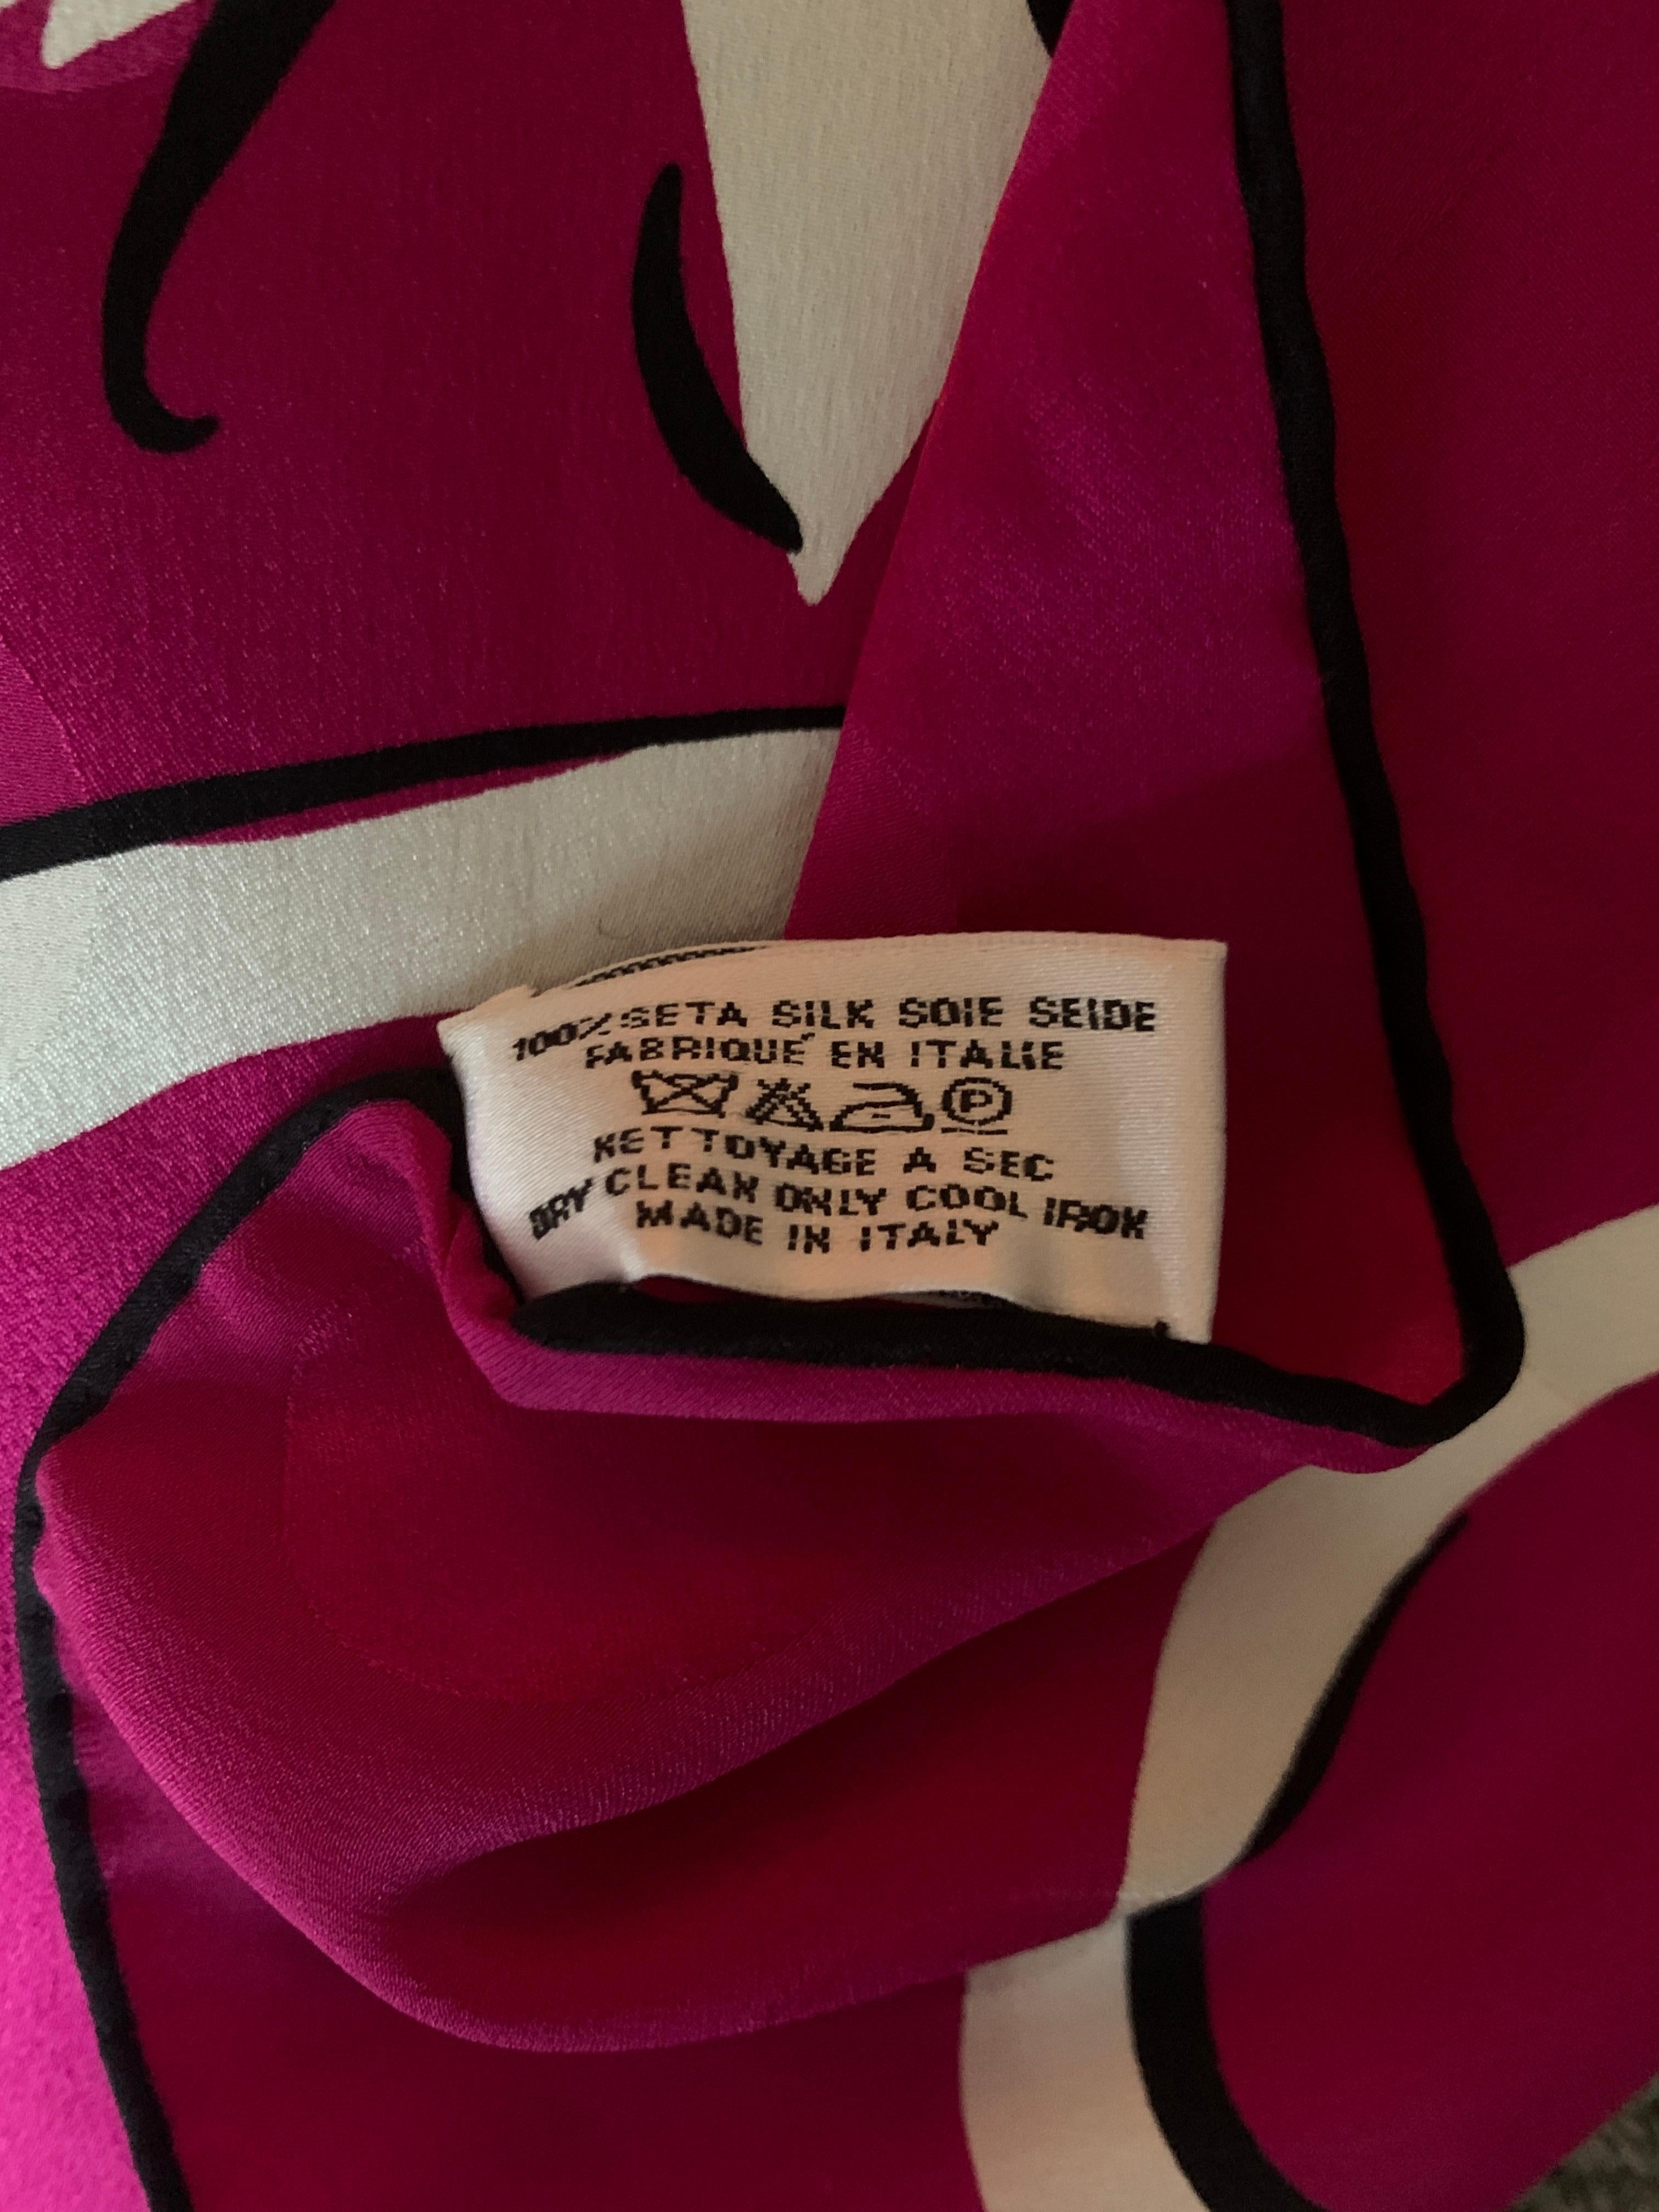 Yves Saint Laurent Vintage Silk Scarf in Fuchsia Pink Dove and Ribbon Print 5